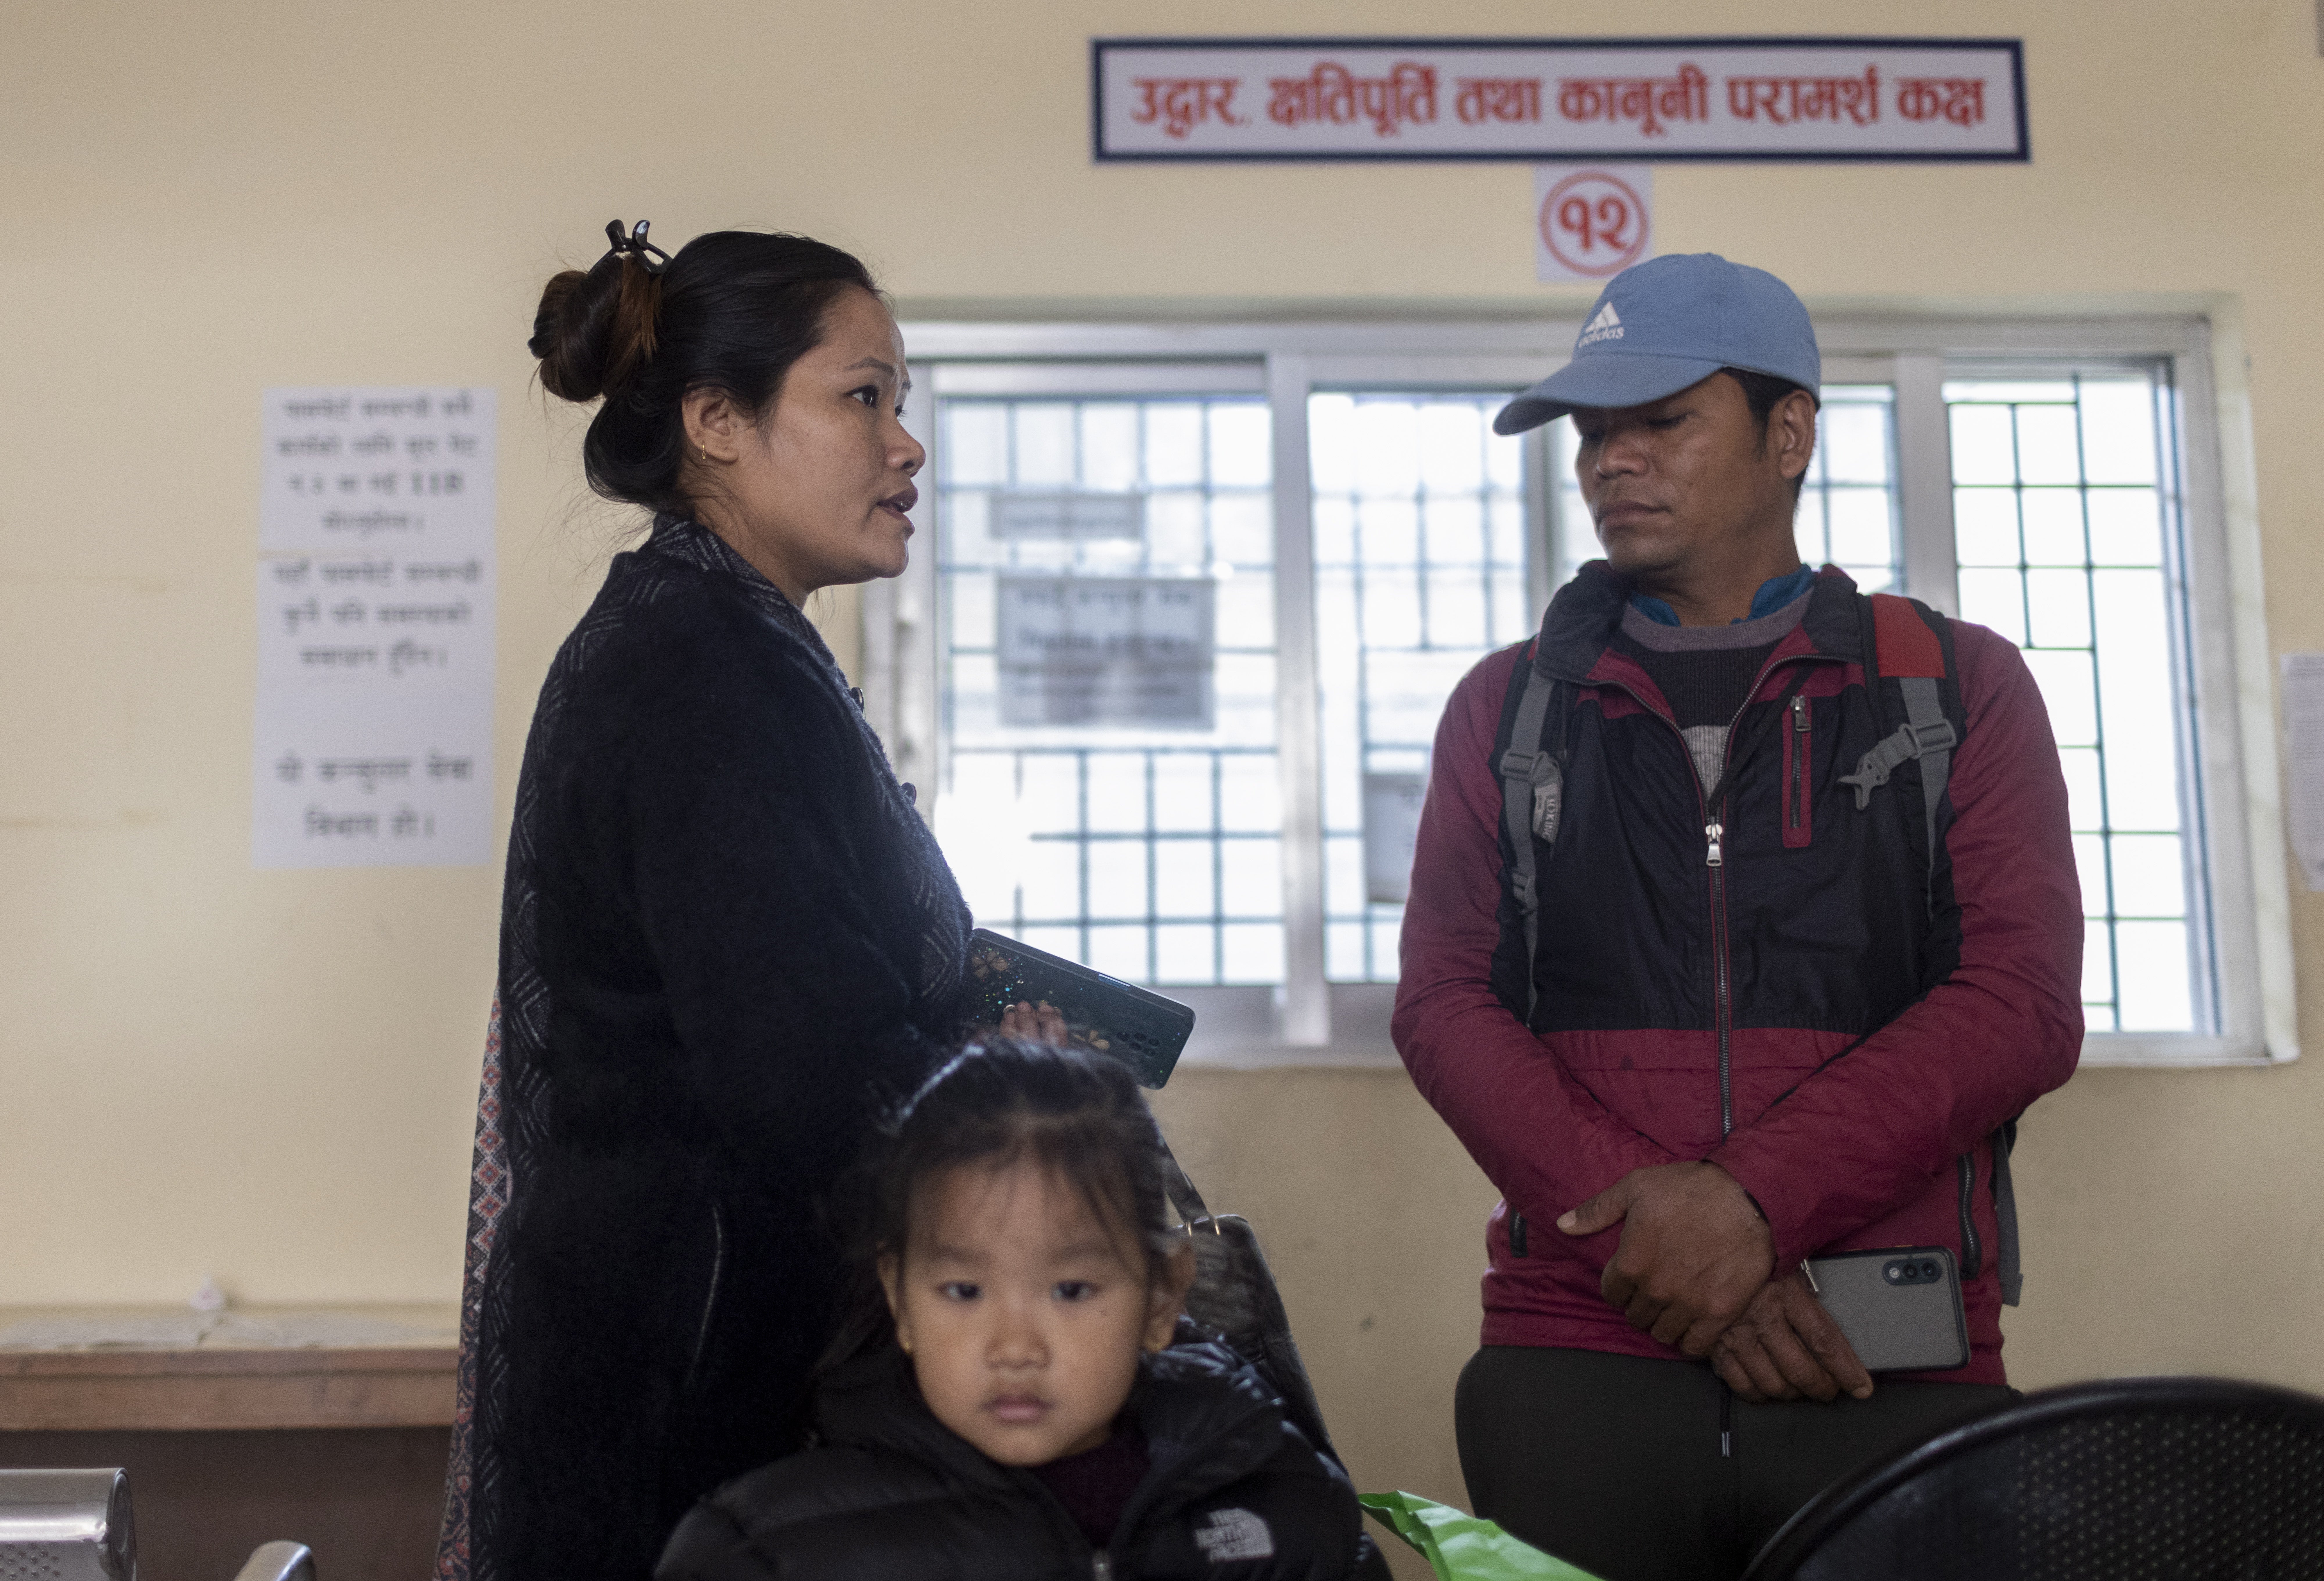 Sanu Kanchi Tumbape (L), along with her brother, submits an appeal letter seeking assistance to rescue her husband, Suresh Tumbape, at the Nepalese Foreign Ministry in Kathmandu